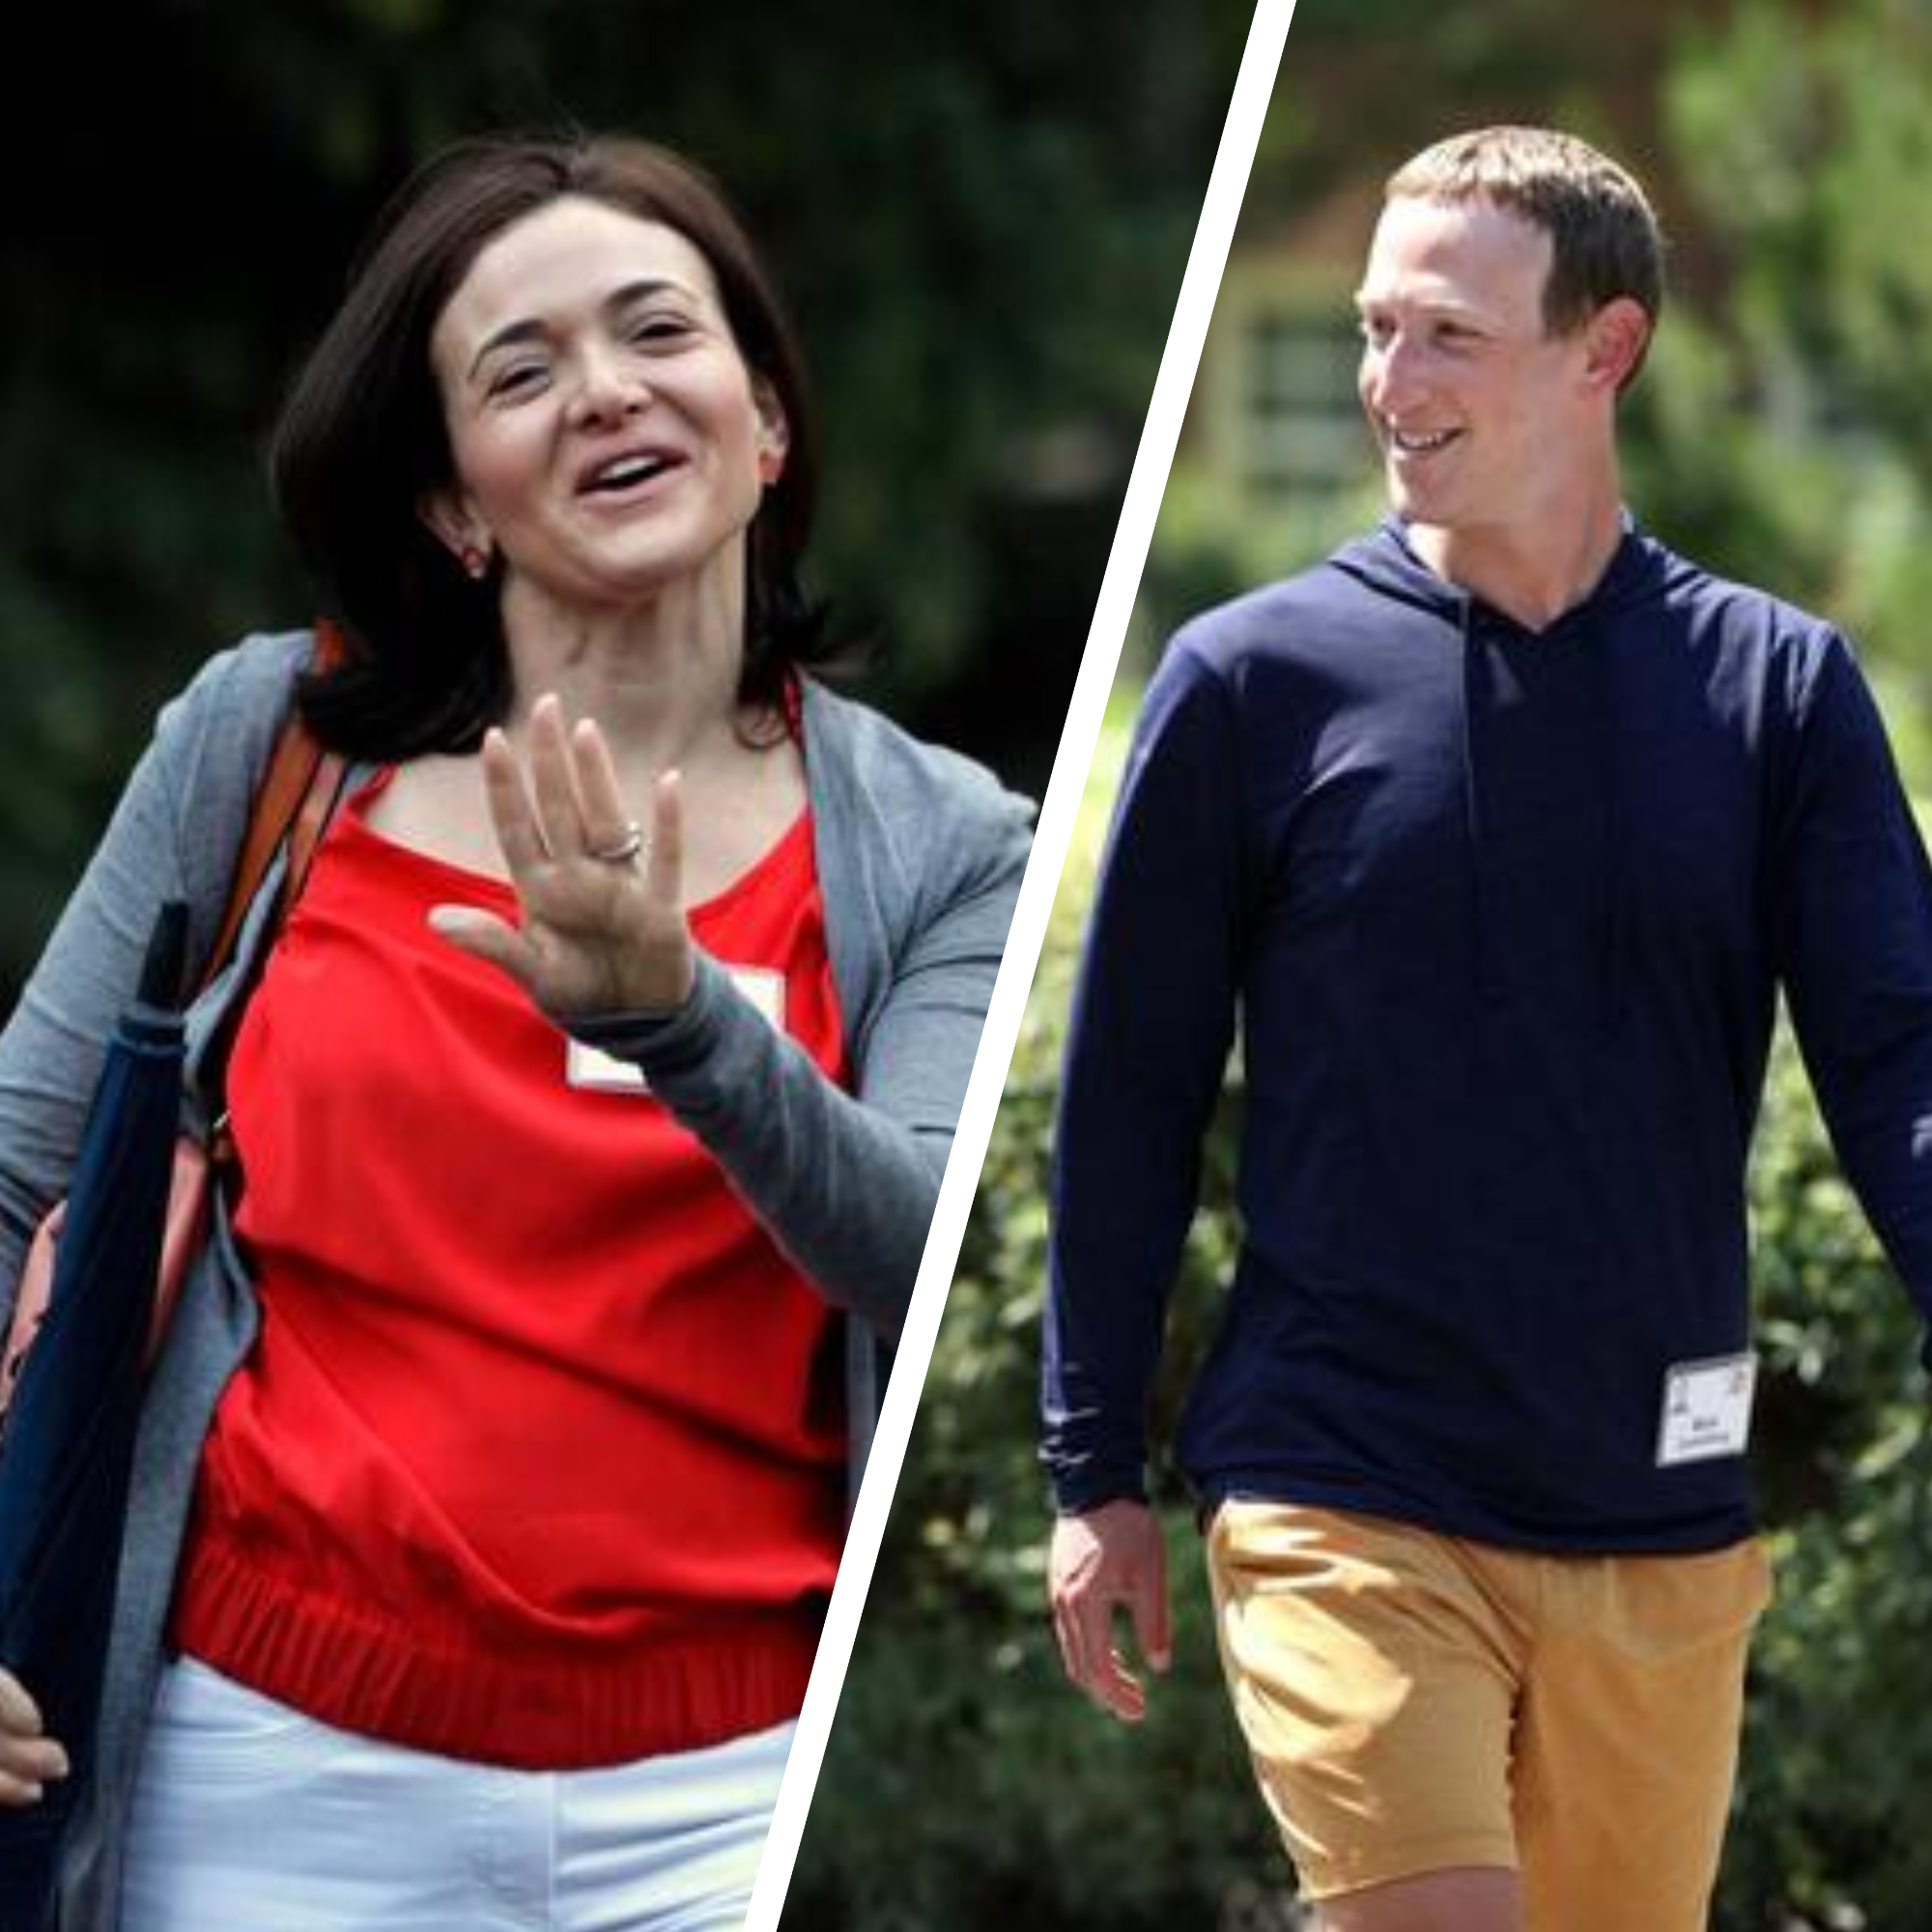 Ex-Meta COO Sheryl Sandberg leaving tech titan’s board after 12 years: ‘Right time to step away’